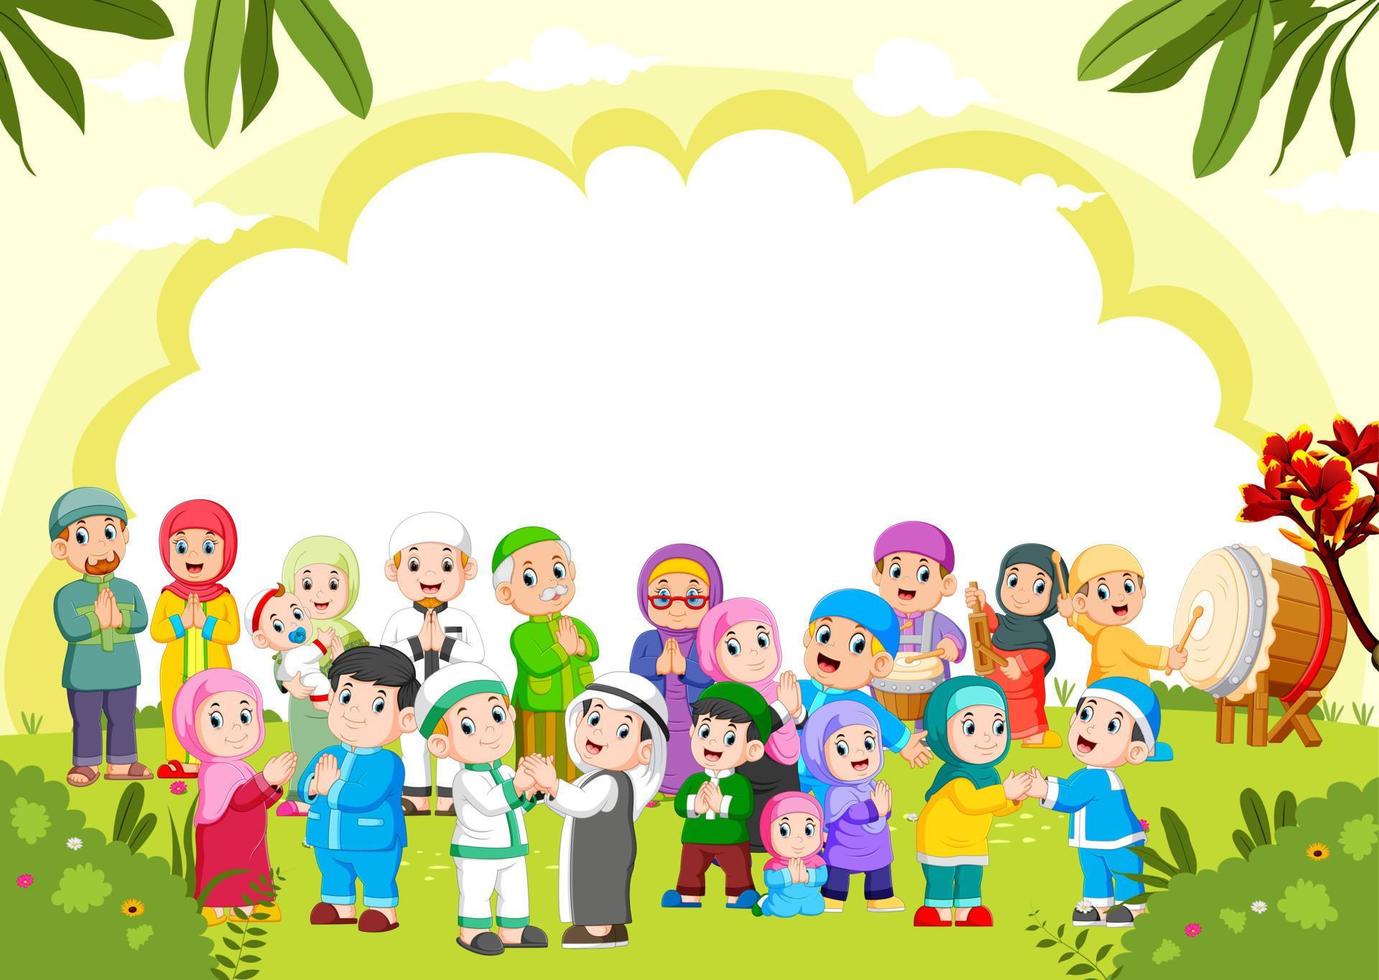 the cute green banner with the muslim people around it vector